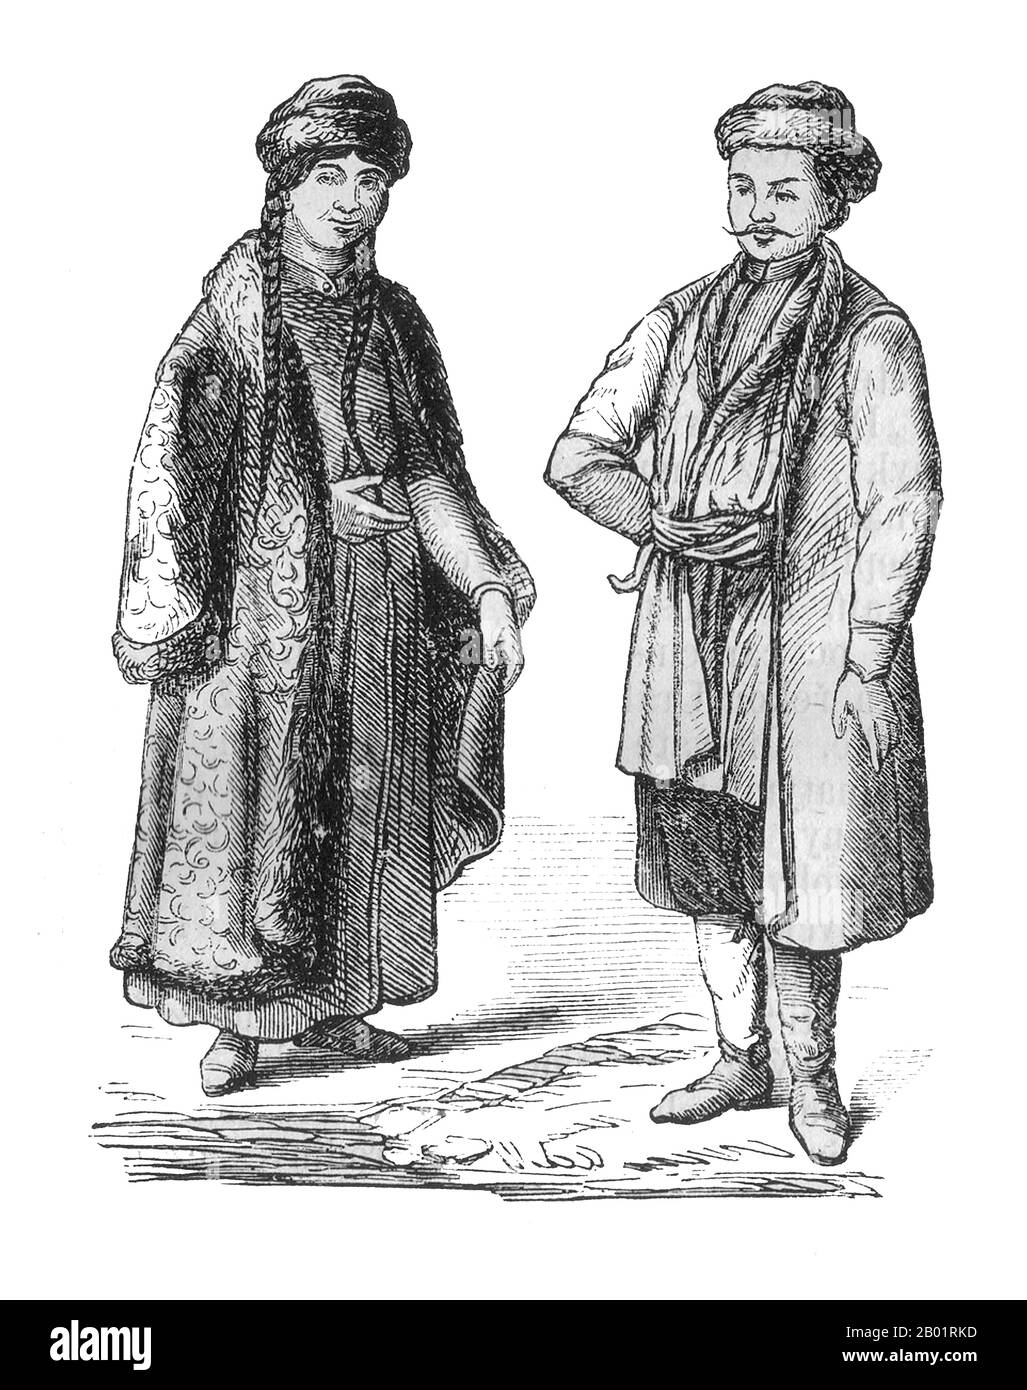 Russia: Kalmyk man and woman, Kalmykia. Engraving, late 19th century  Kalmyk people (or Kalmyks) (Kalmyk: Хальмгуд, Halm'gud) is the name given to the Oirats, western Mongols in Russia, whose descendants migrated from Dzungaria in 1607. Today they form a majority in the autonomous Republic of Kalmykia on the western shore of the Caspian Sea.  Kalmykia is Europe's only Buddhist state. Through emigration, small Kalmyk communities have been established in the United States, France, Germany, Switzerland and the Czech Republic. Stock Photo